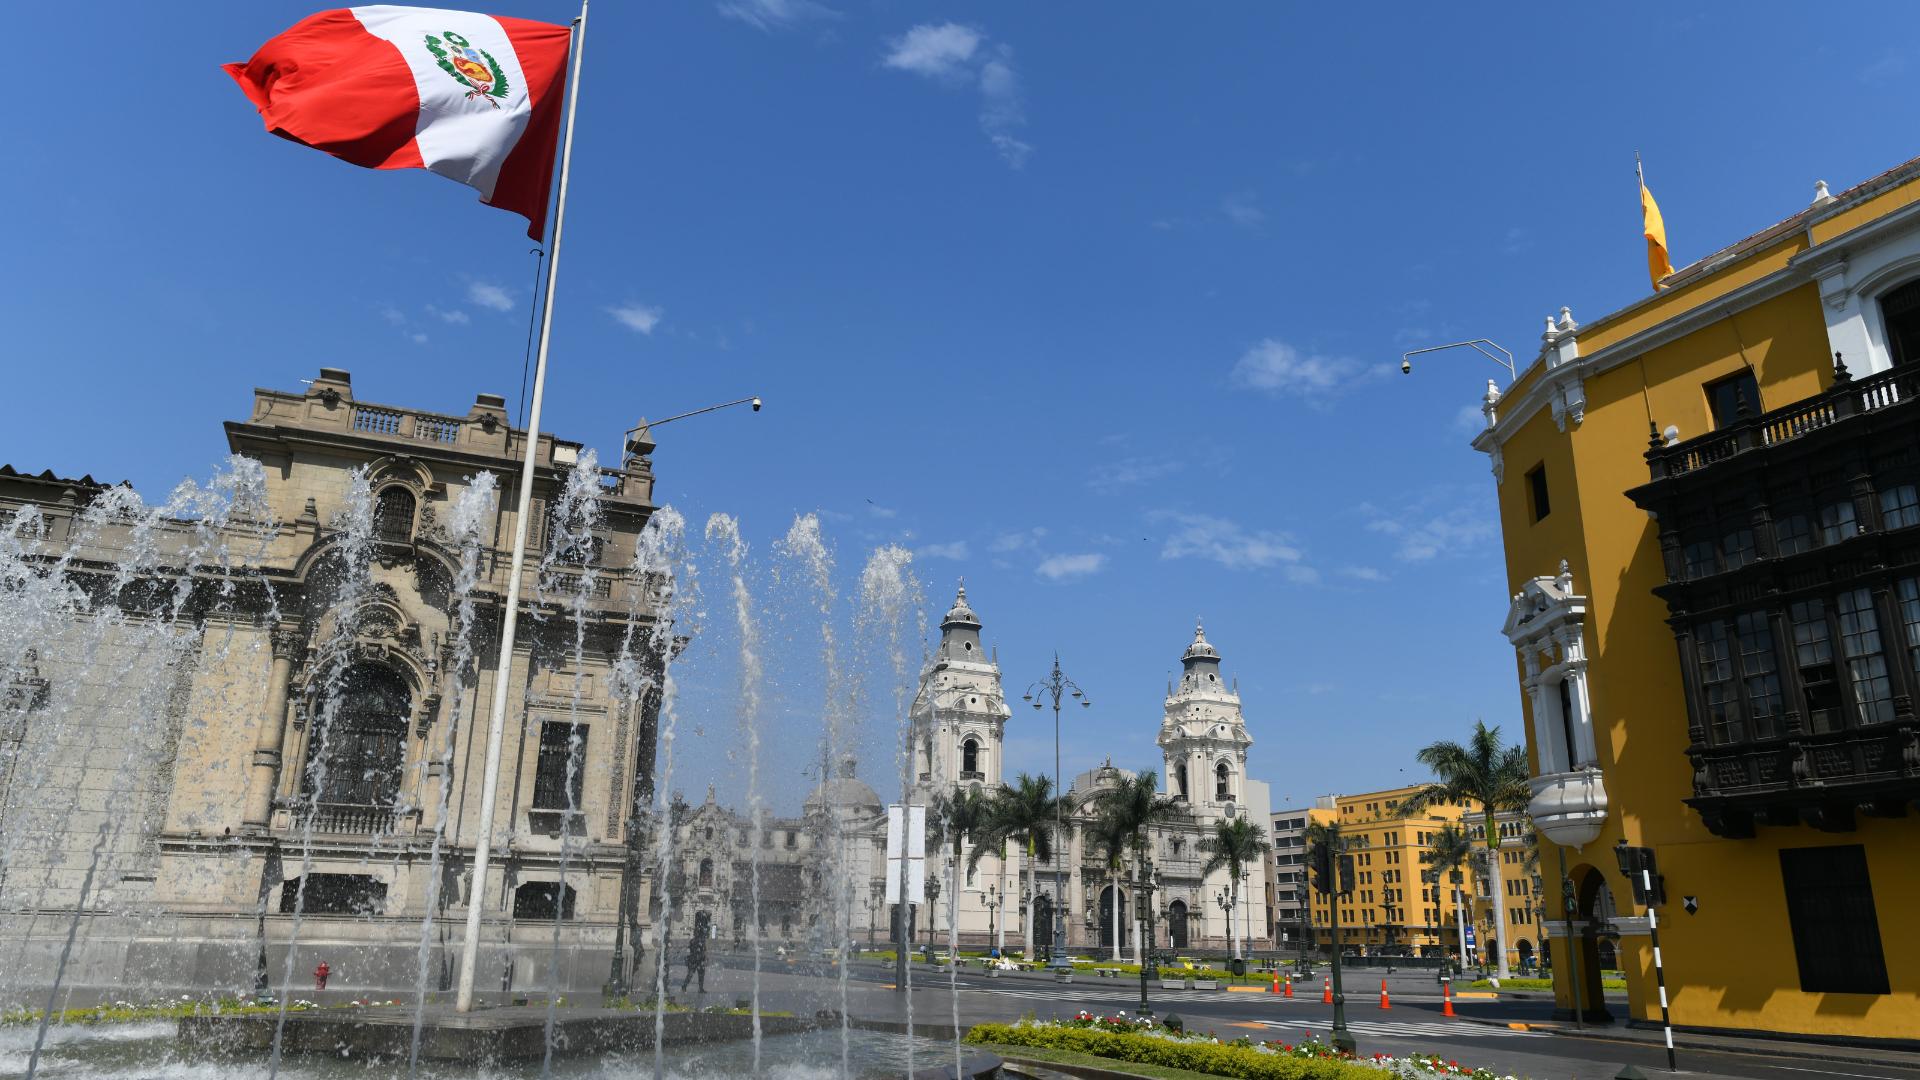 Peruvian square with fountain and flag surrounded by colorful buildings